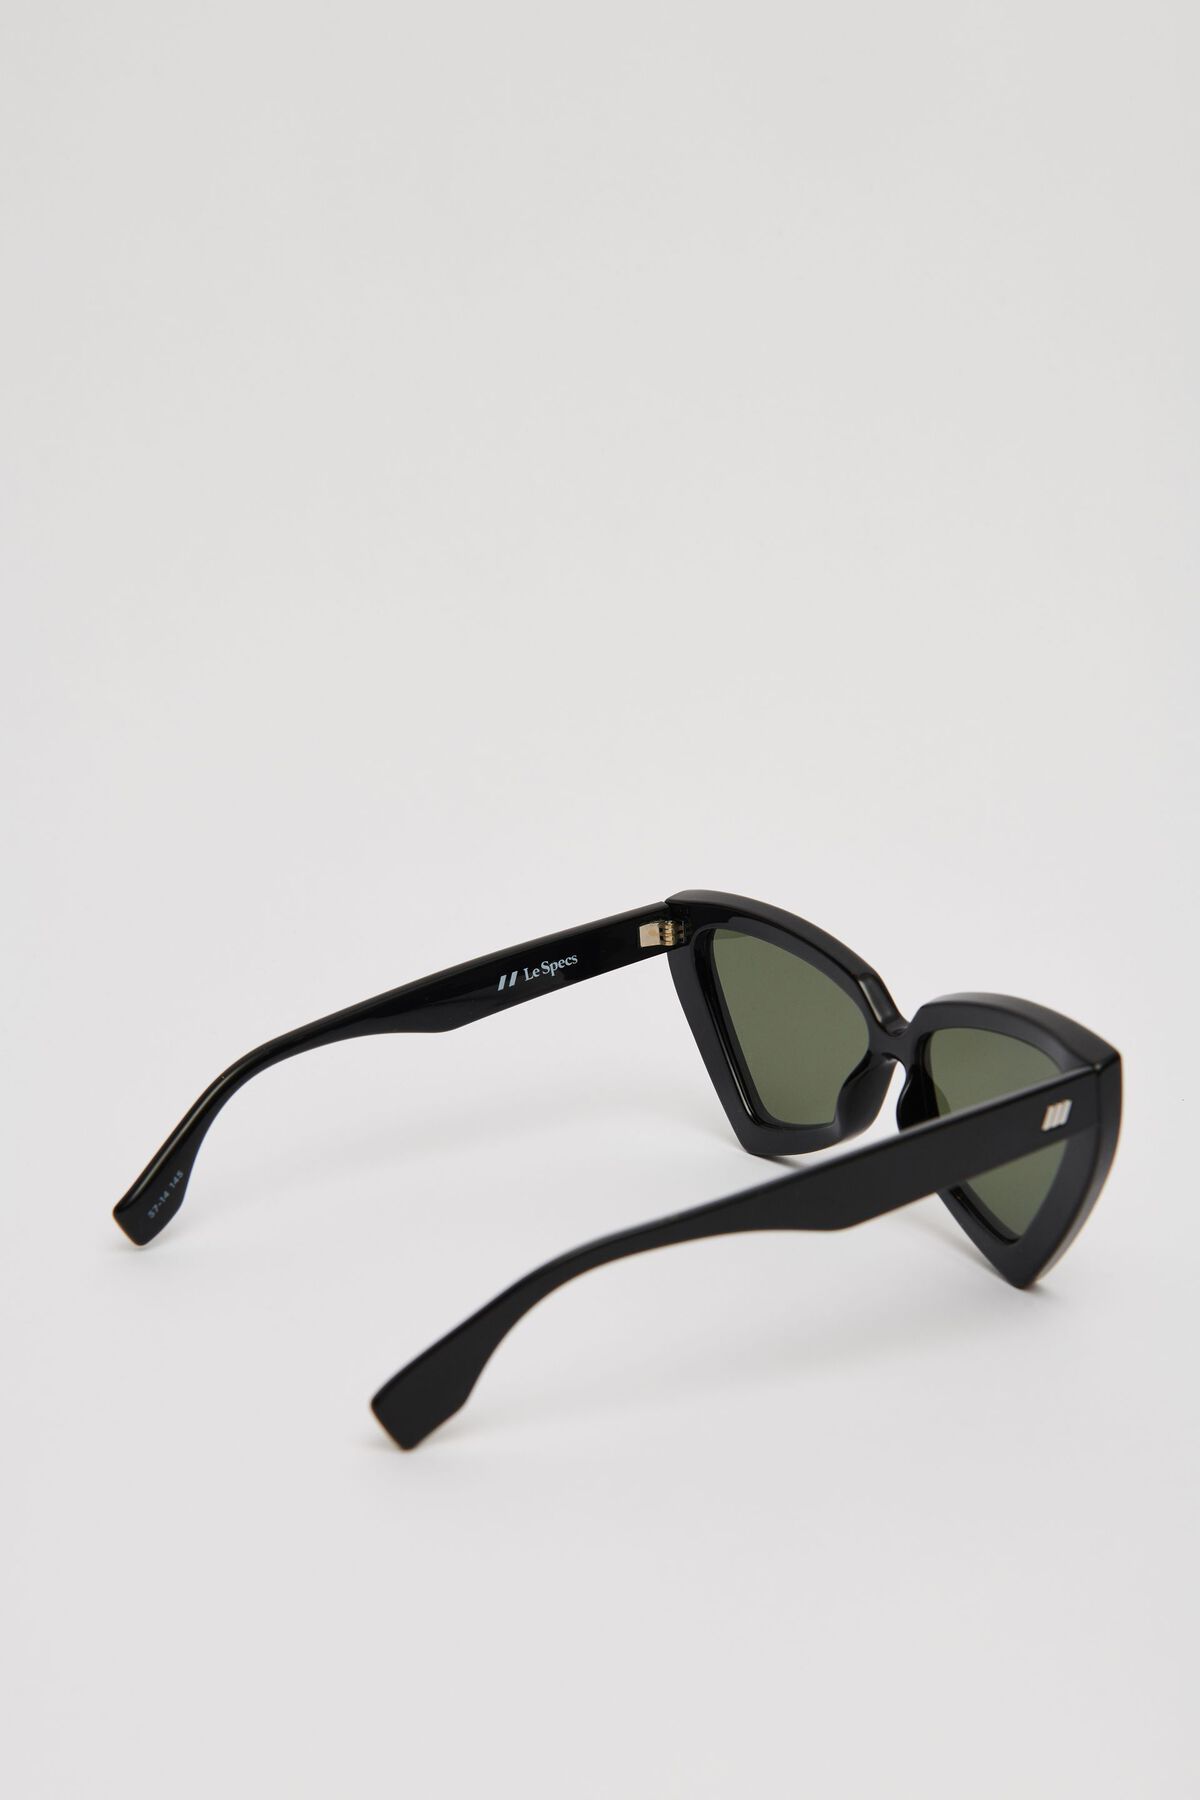 Dynamite LE SPECS | Rinky Dink Sunglasses. 4